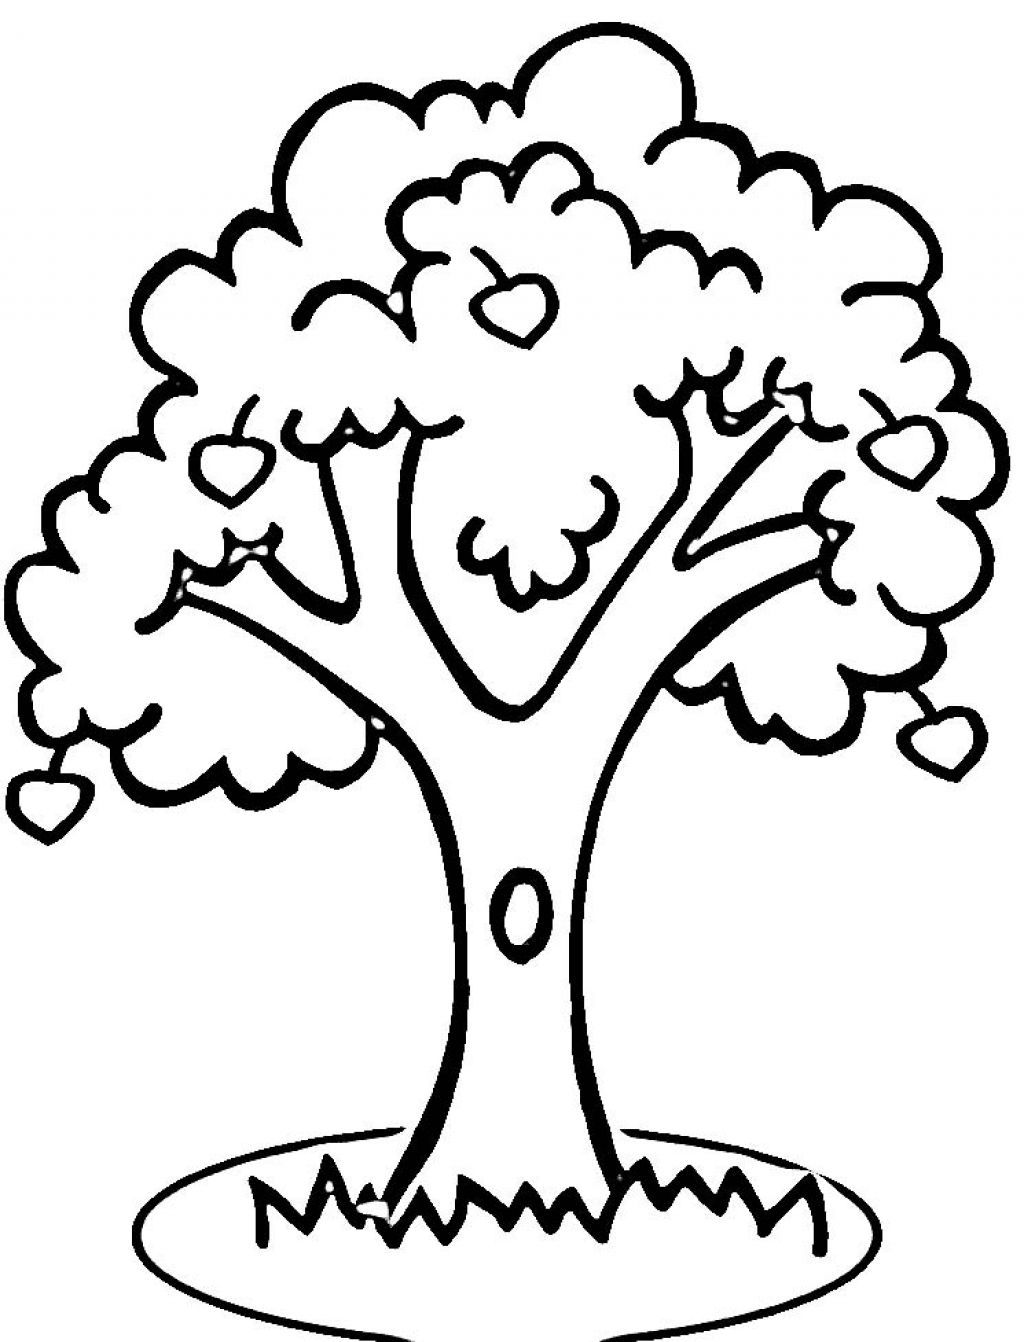 coloring pages of a tree - High Quality Coloring Pages